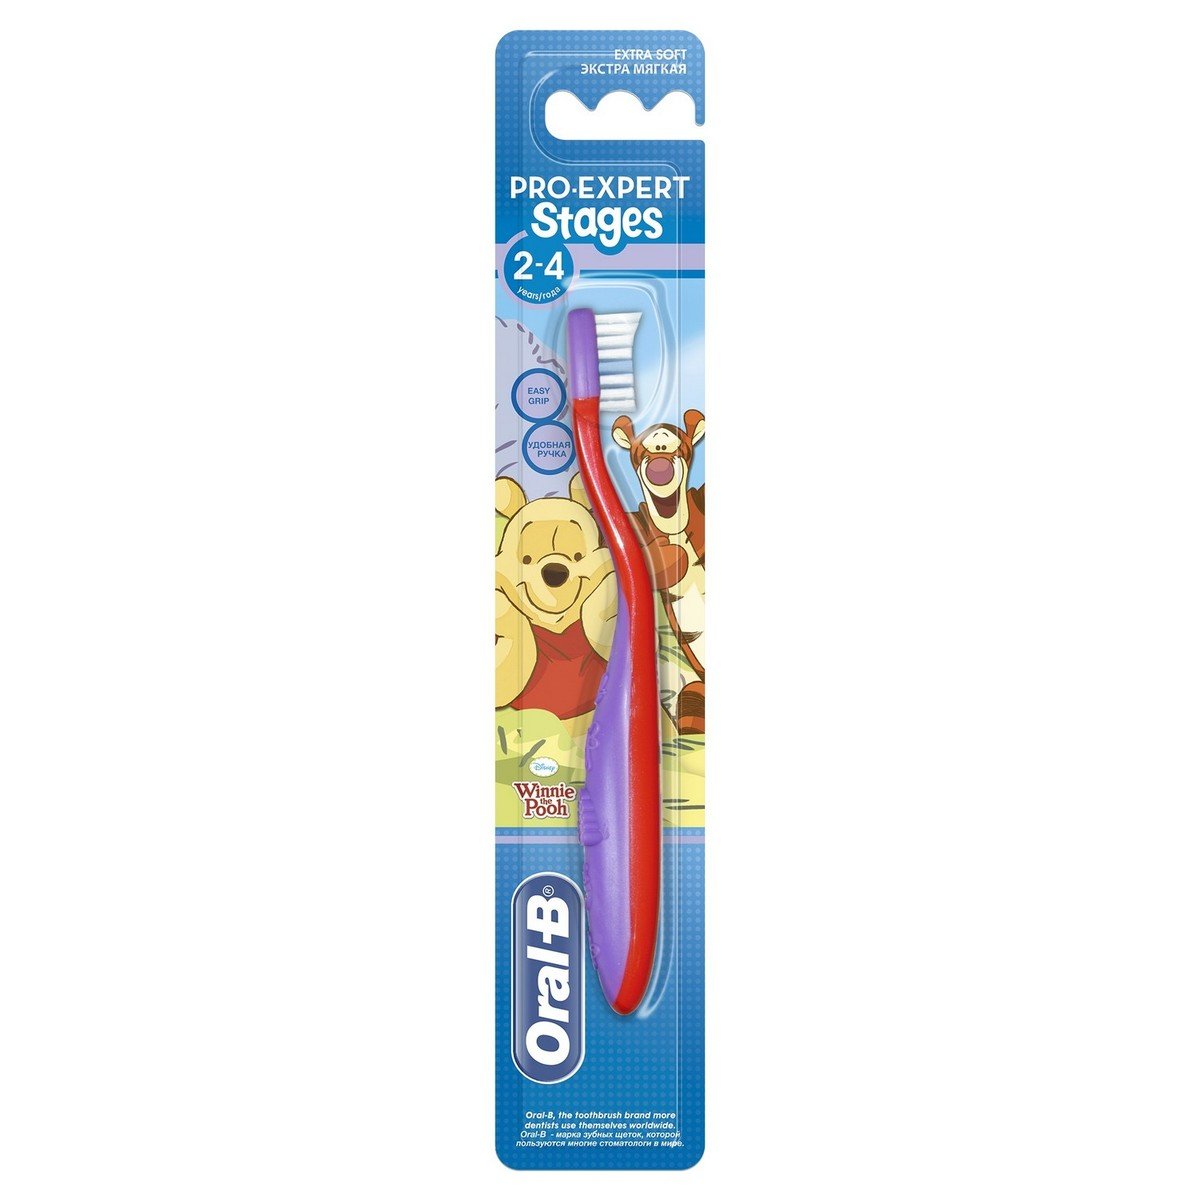 Oral-B Stages 2 (2 - 4 years) Manual Kids Toothbrush Assorted Color